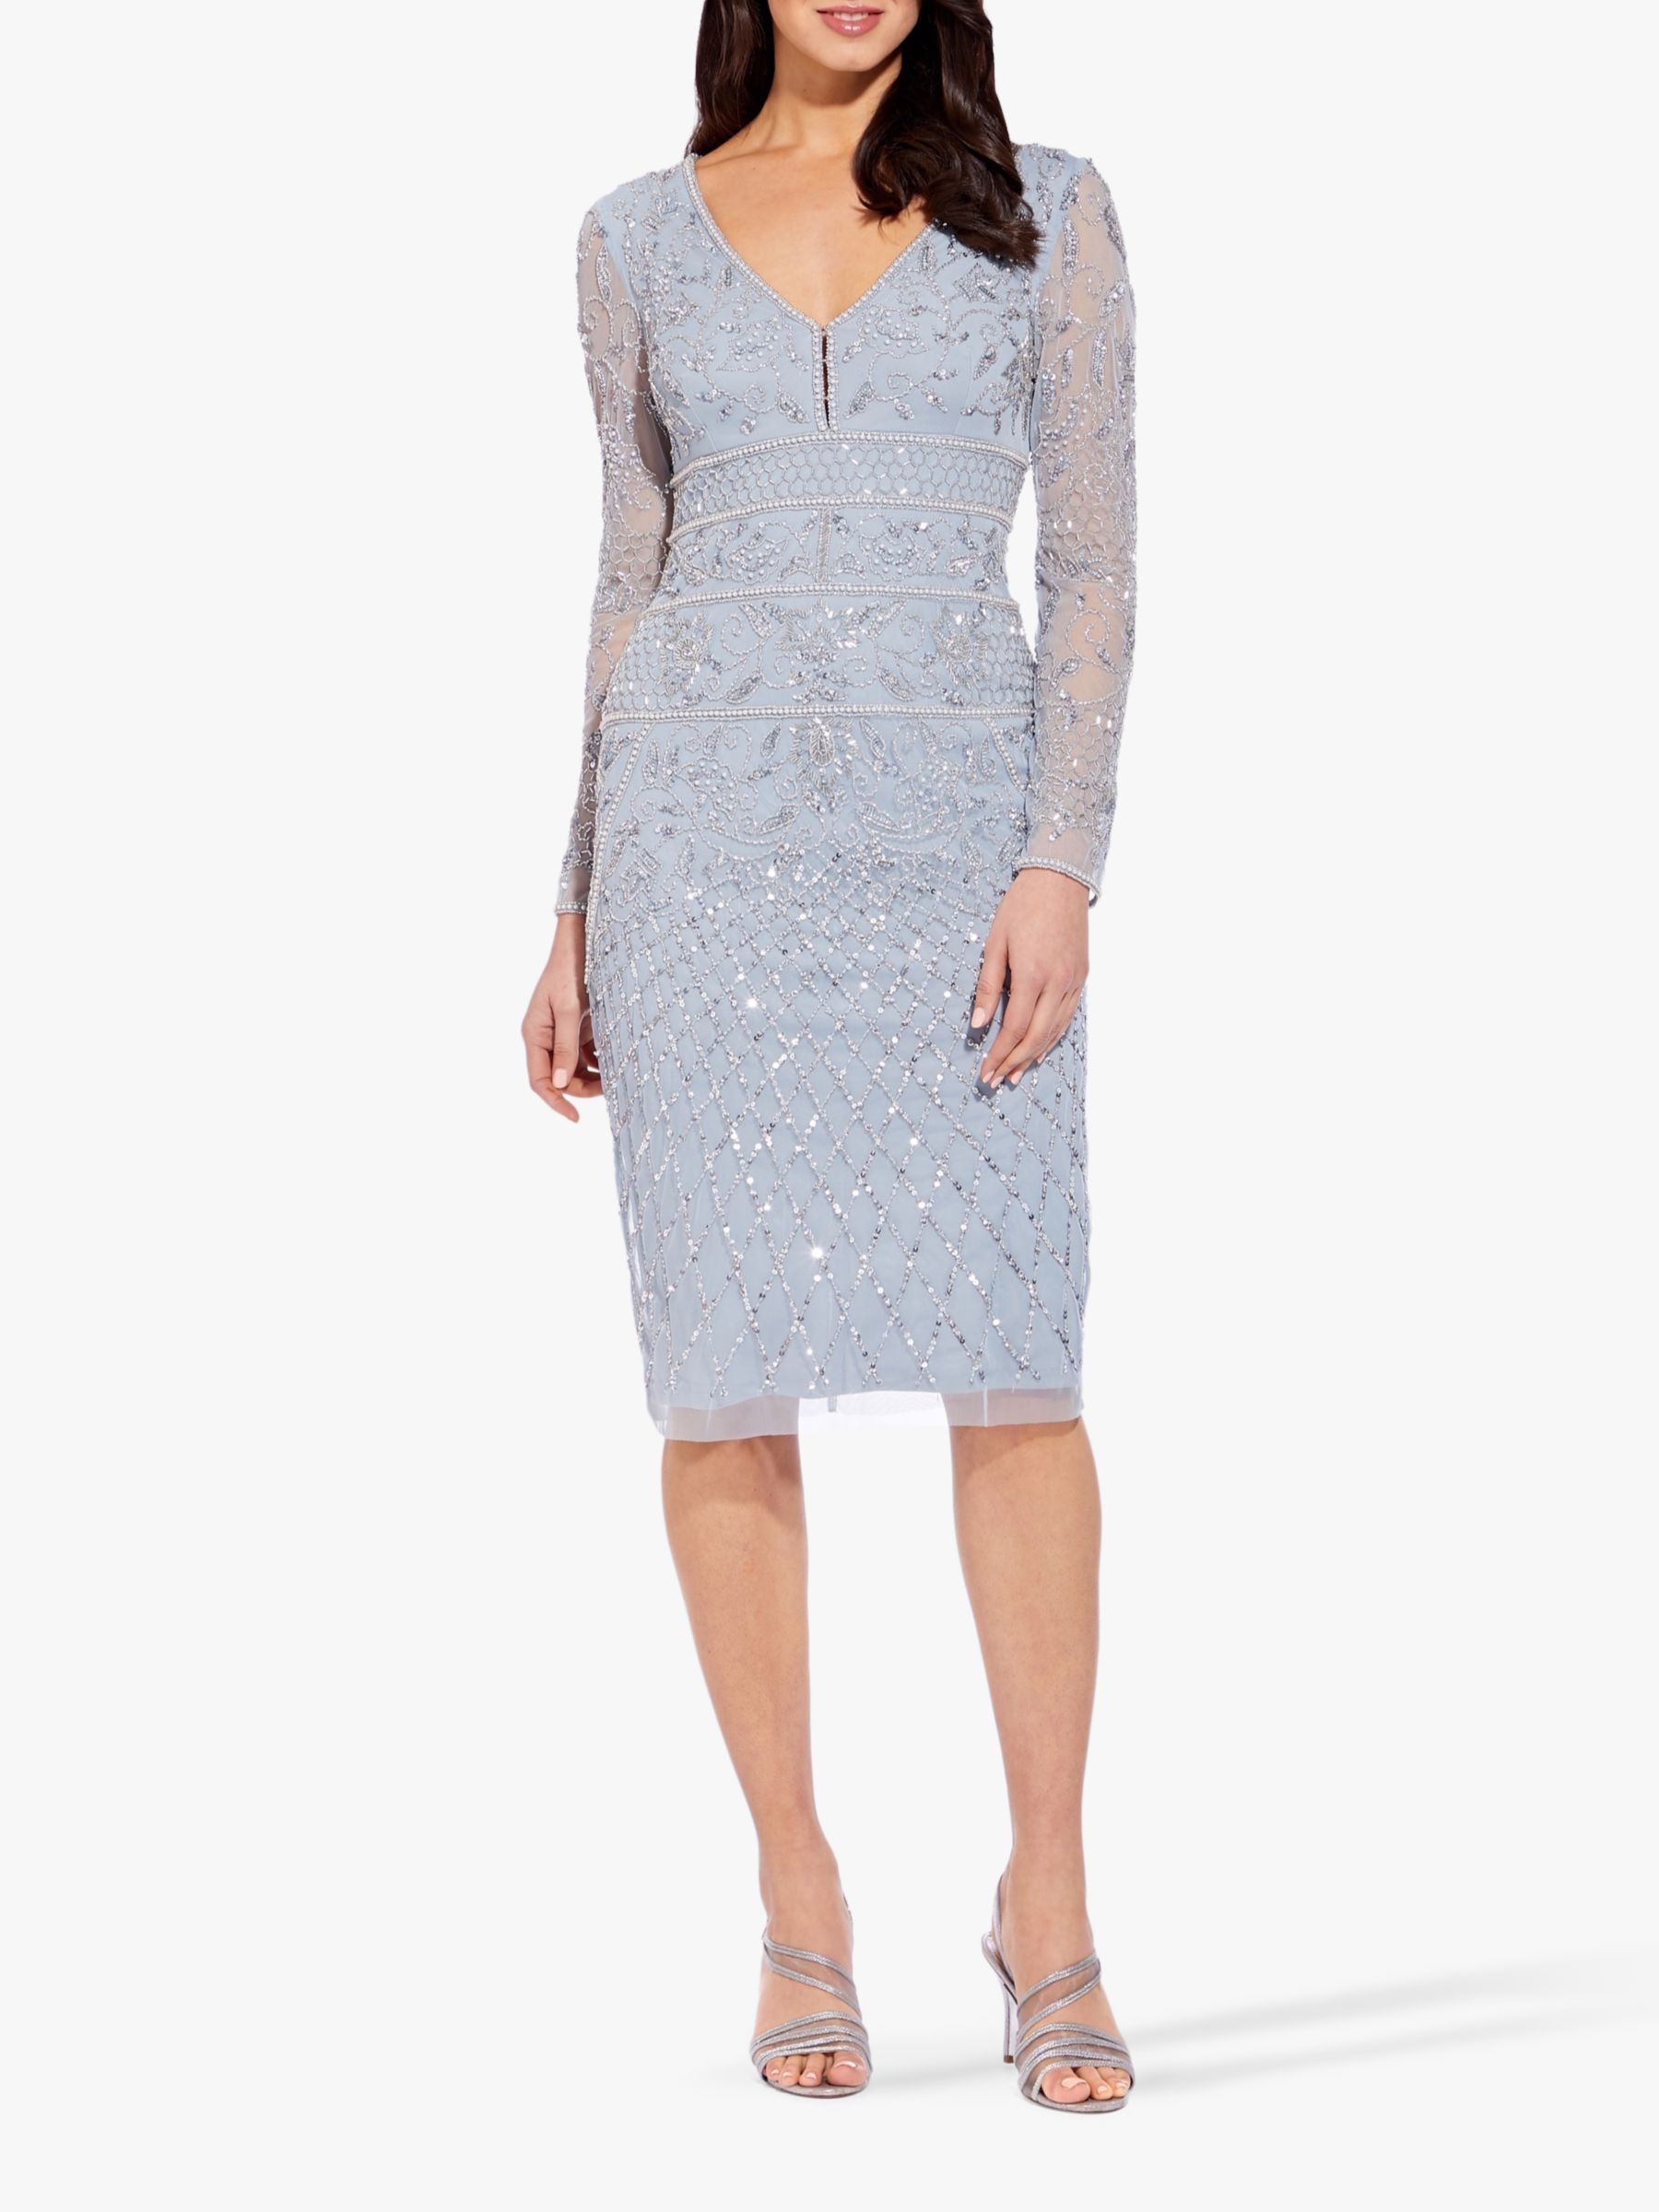 Adrianna Papell Beaded Sheath Cocktail Dress Blue Heather At John Lewis And Partners